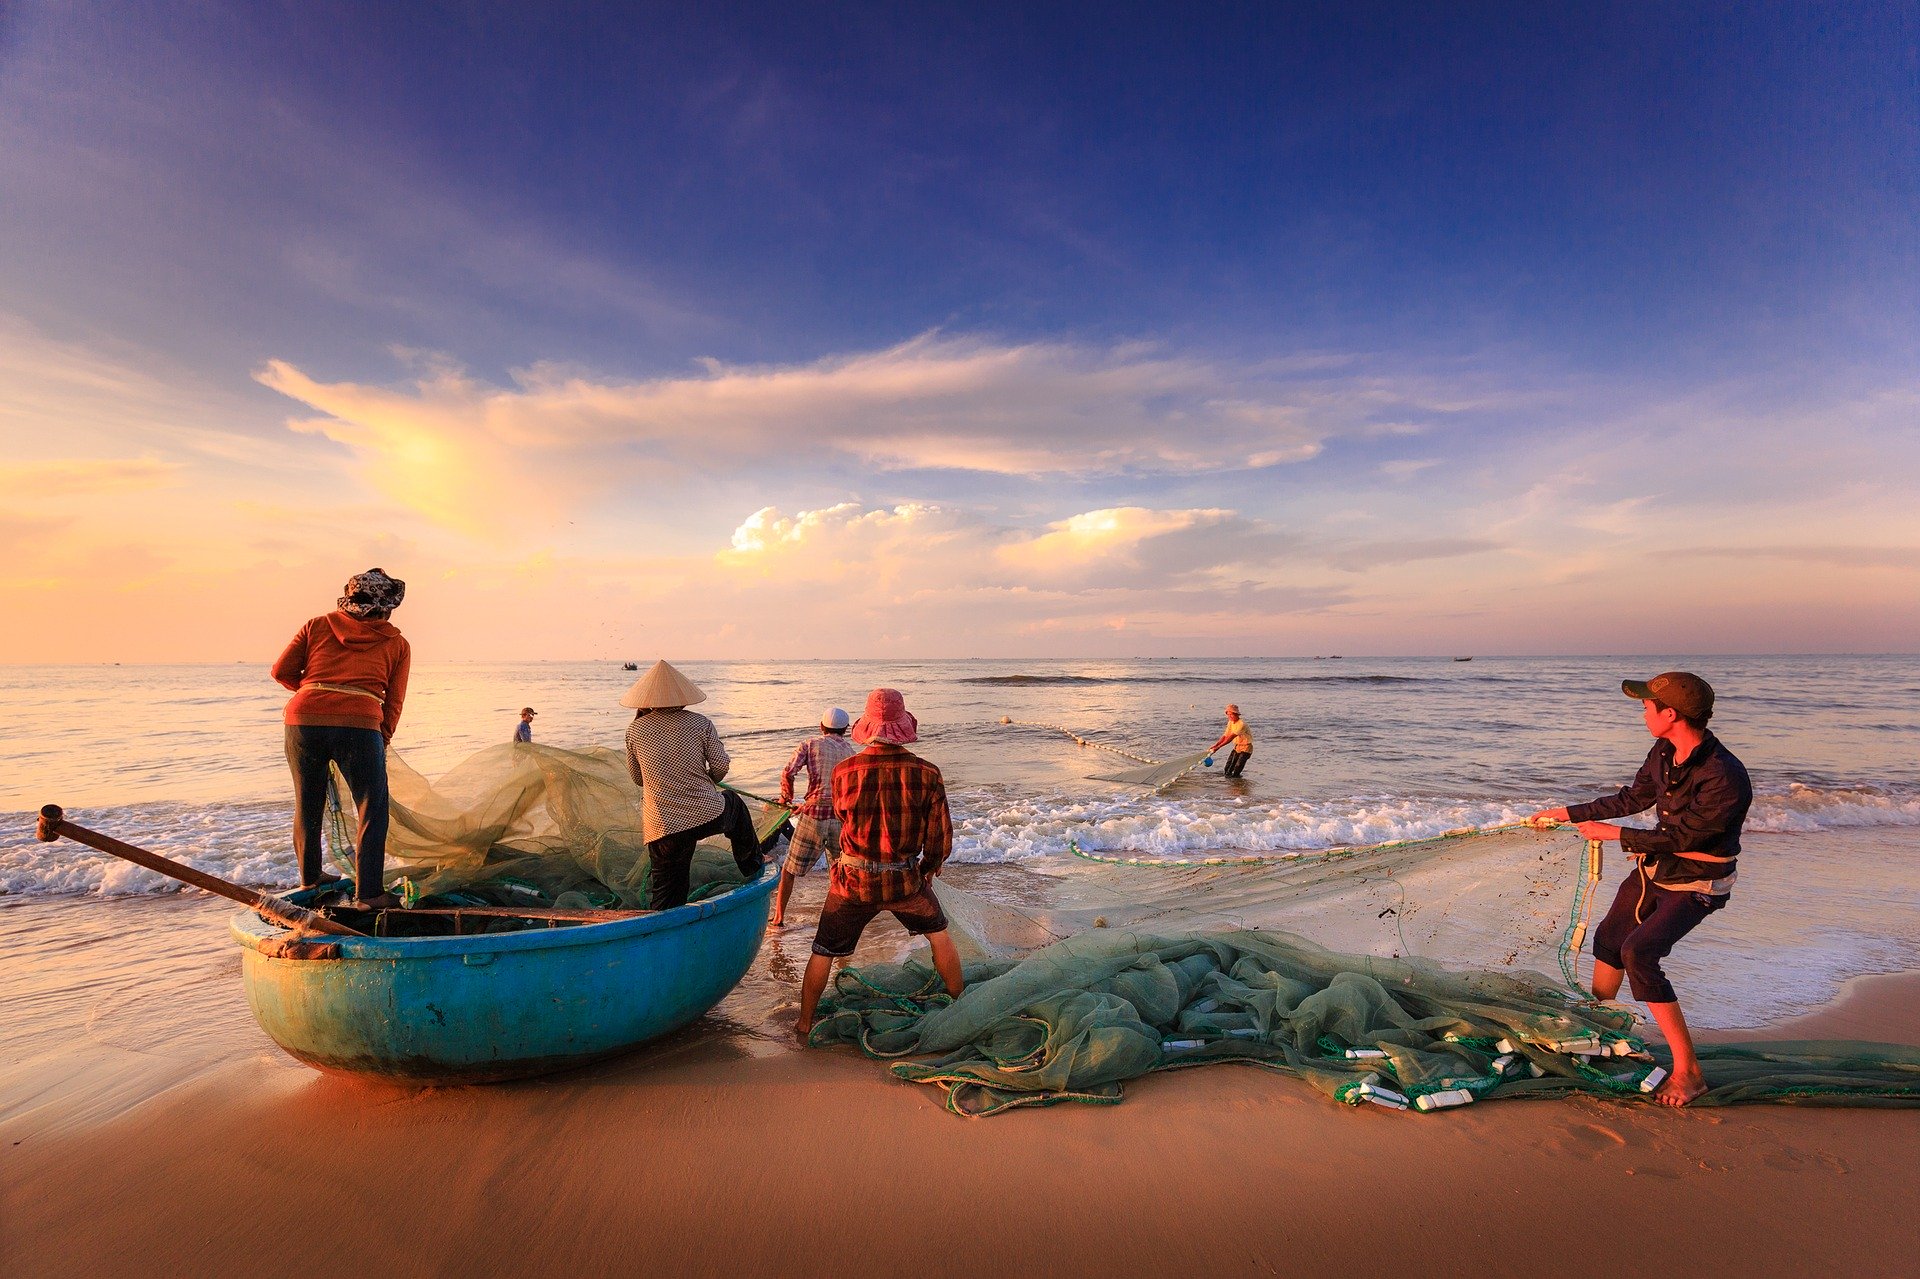 Marine fisheries policy: India's small-scale fishermen have been ignored  yet again